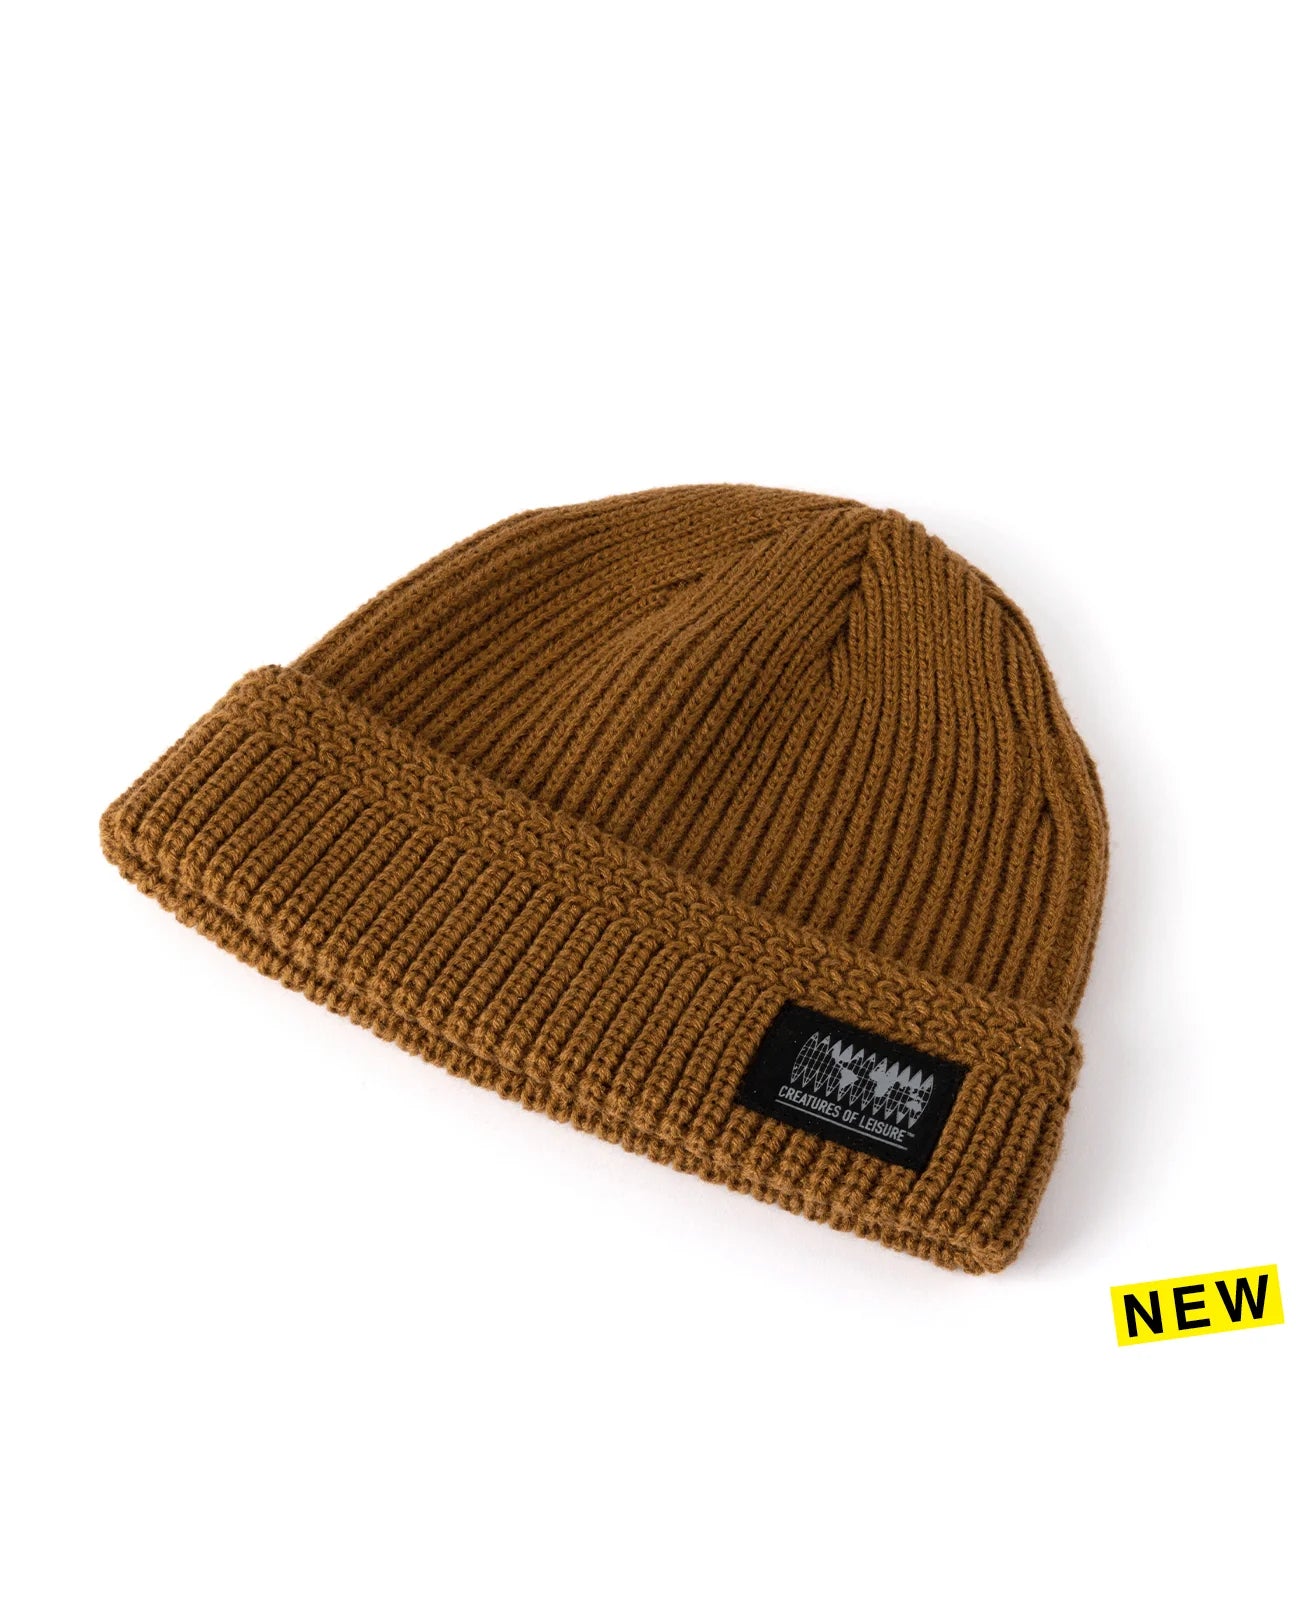 Creatures Global Hardware Recycled Beanie - Star Surf + Skate